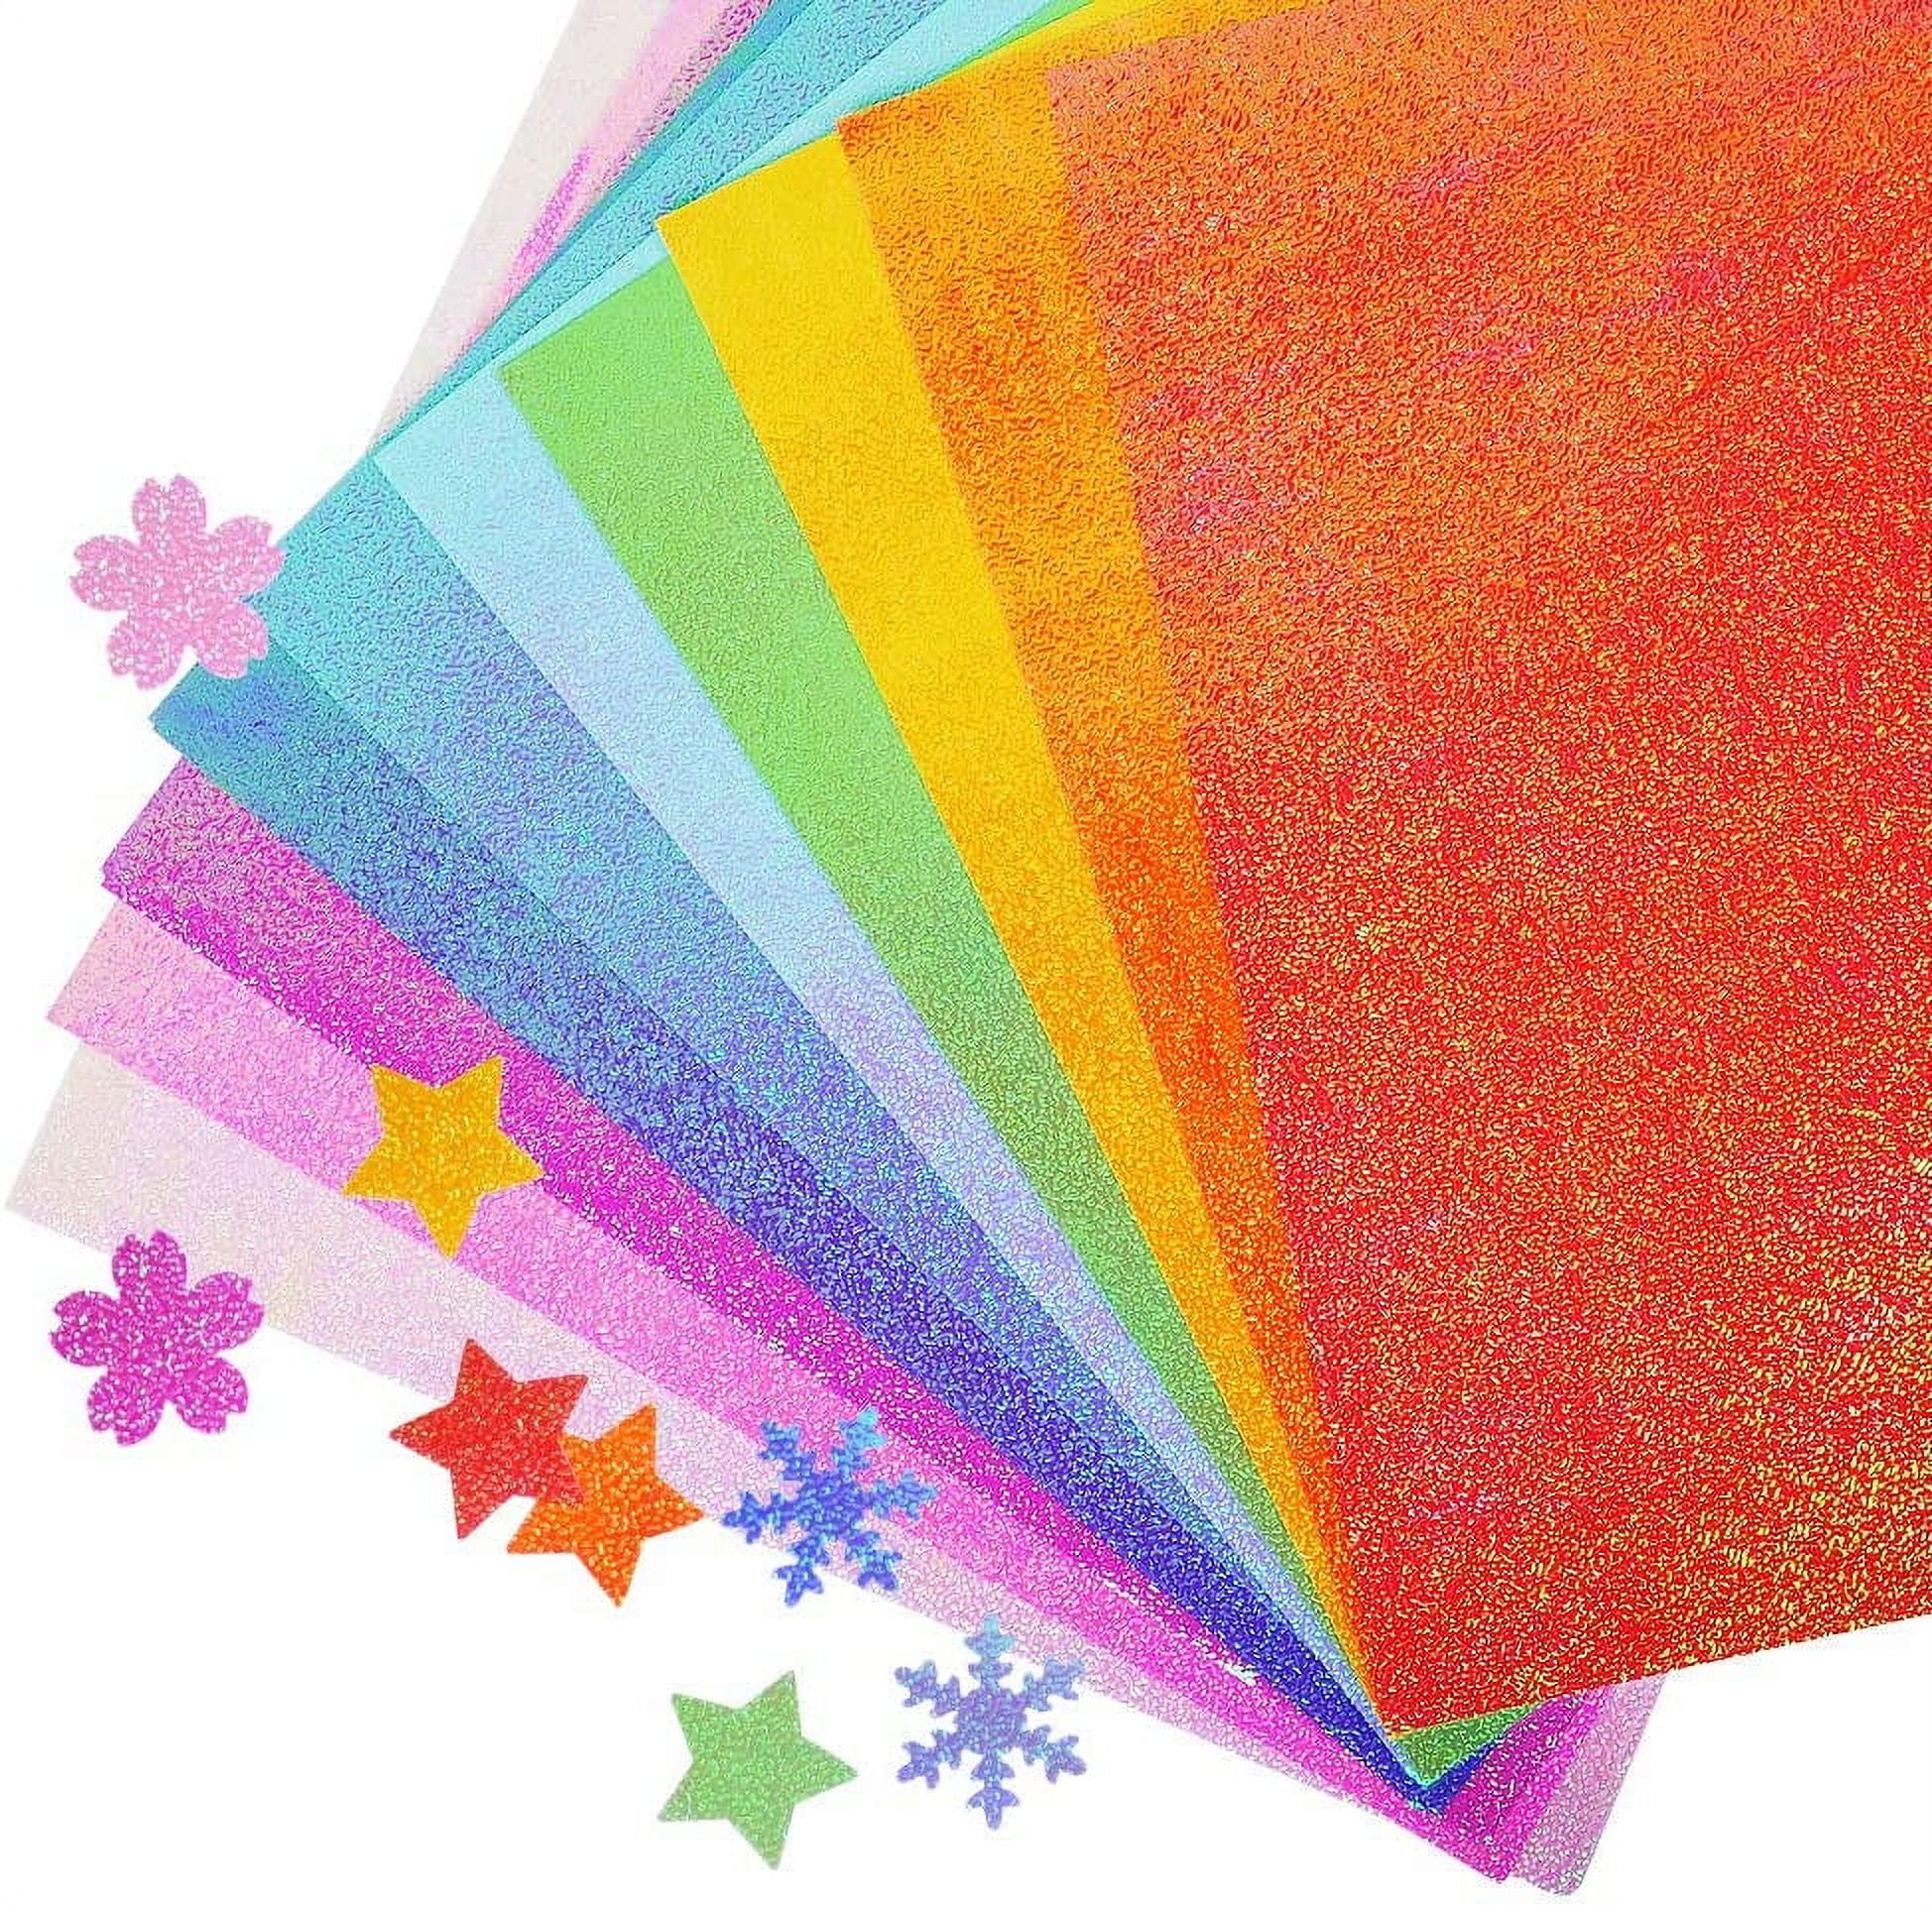 UCEC Shimmer Paper Glitter Origami Paper, 50 Sheets Double-Sided Metallic  Pearlescent Cardstock Paper for Gift Box Wrapping Paper Craft Flowers